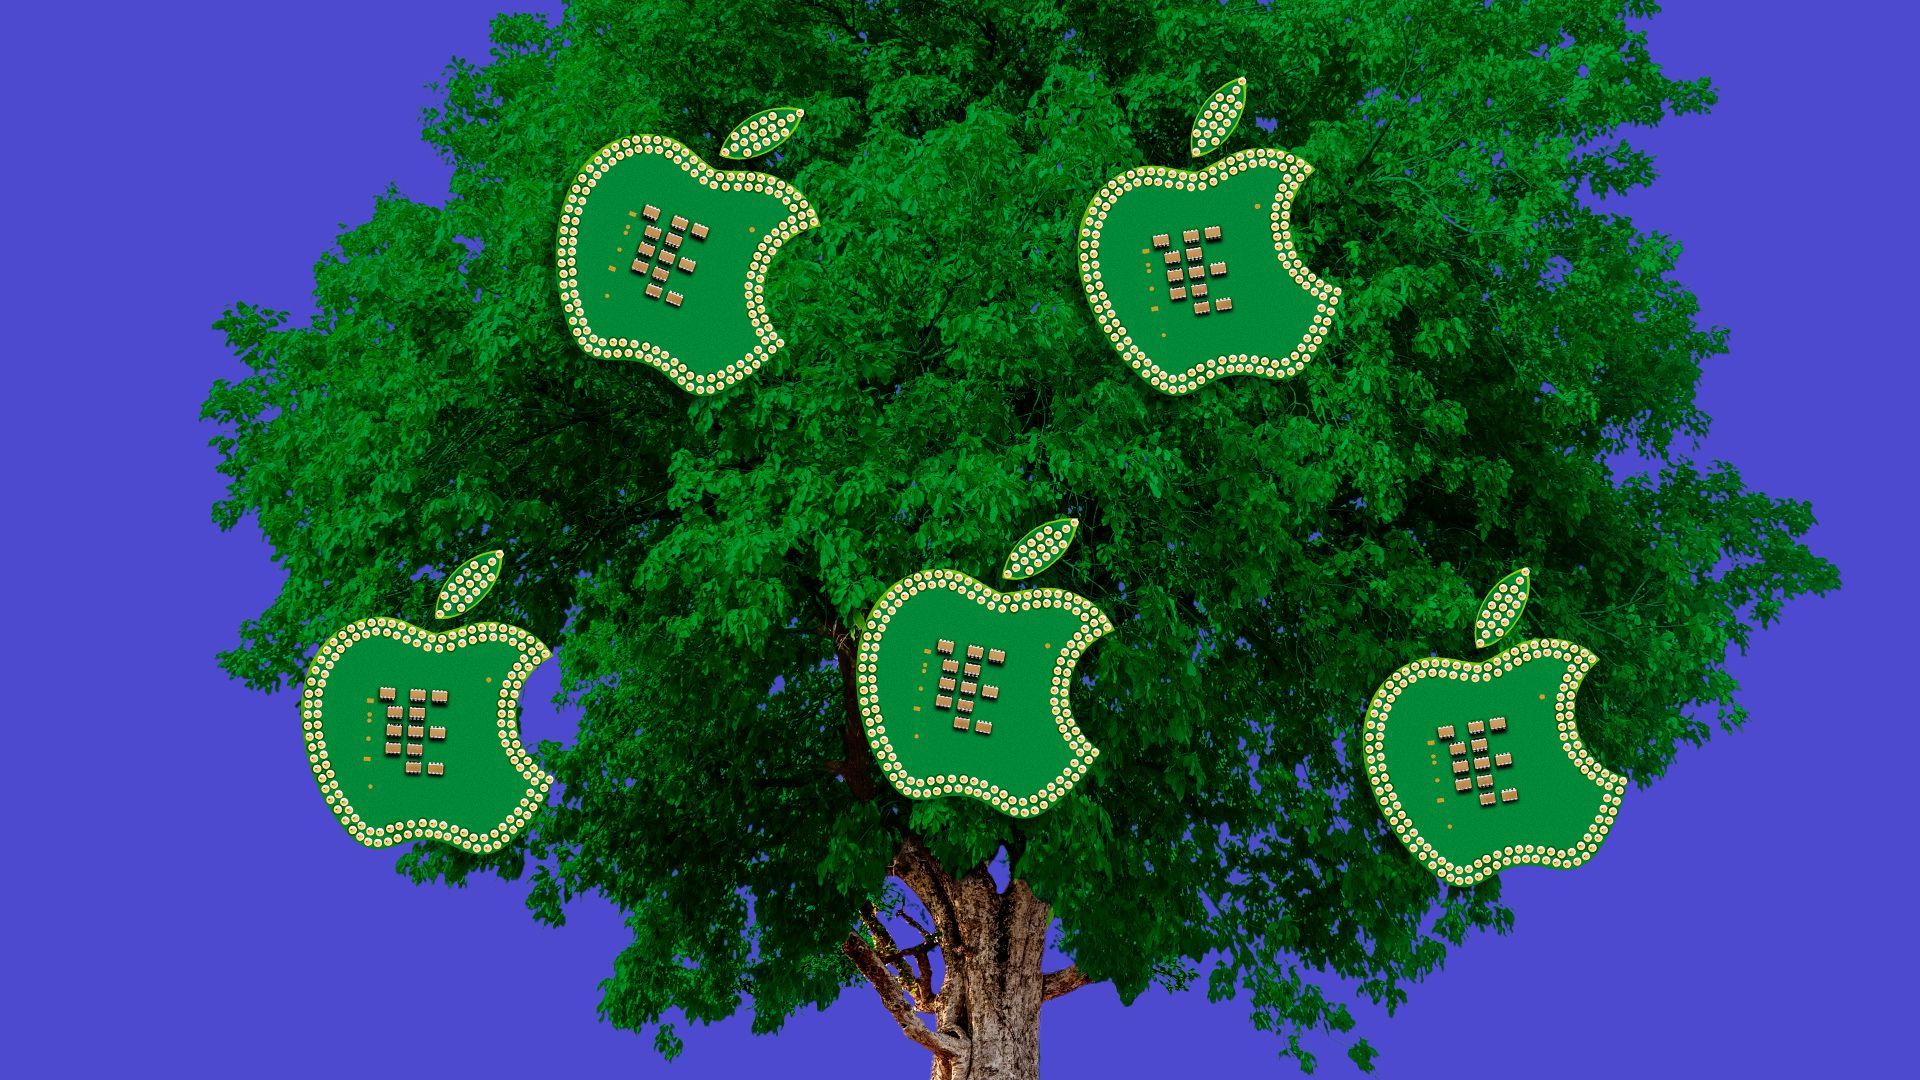 Illustration of a tree with Apple logo shaped computer chips dangling from the branches.  